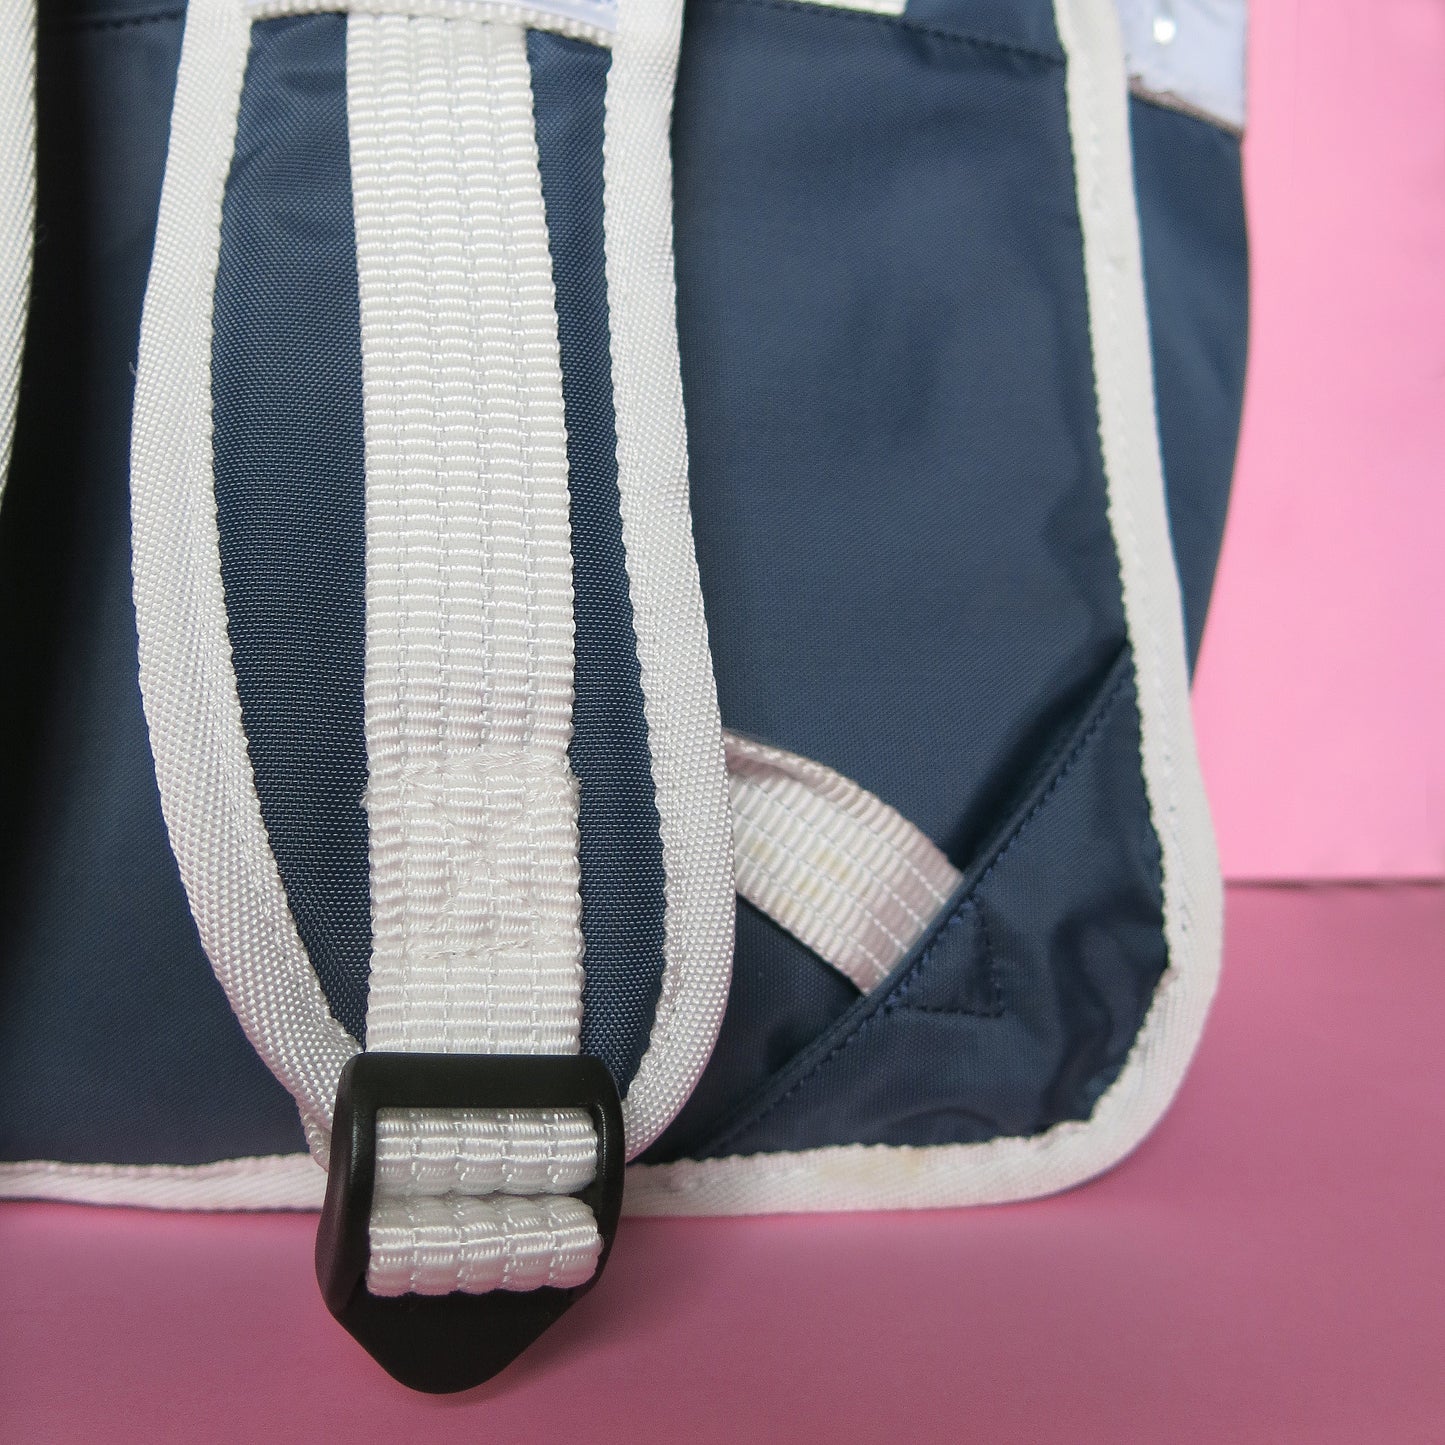 Rolltop backpack Pannier Eco Navy Blue White